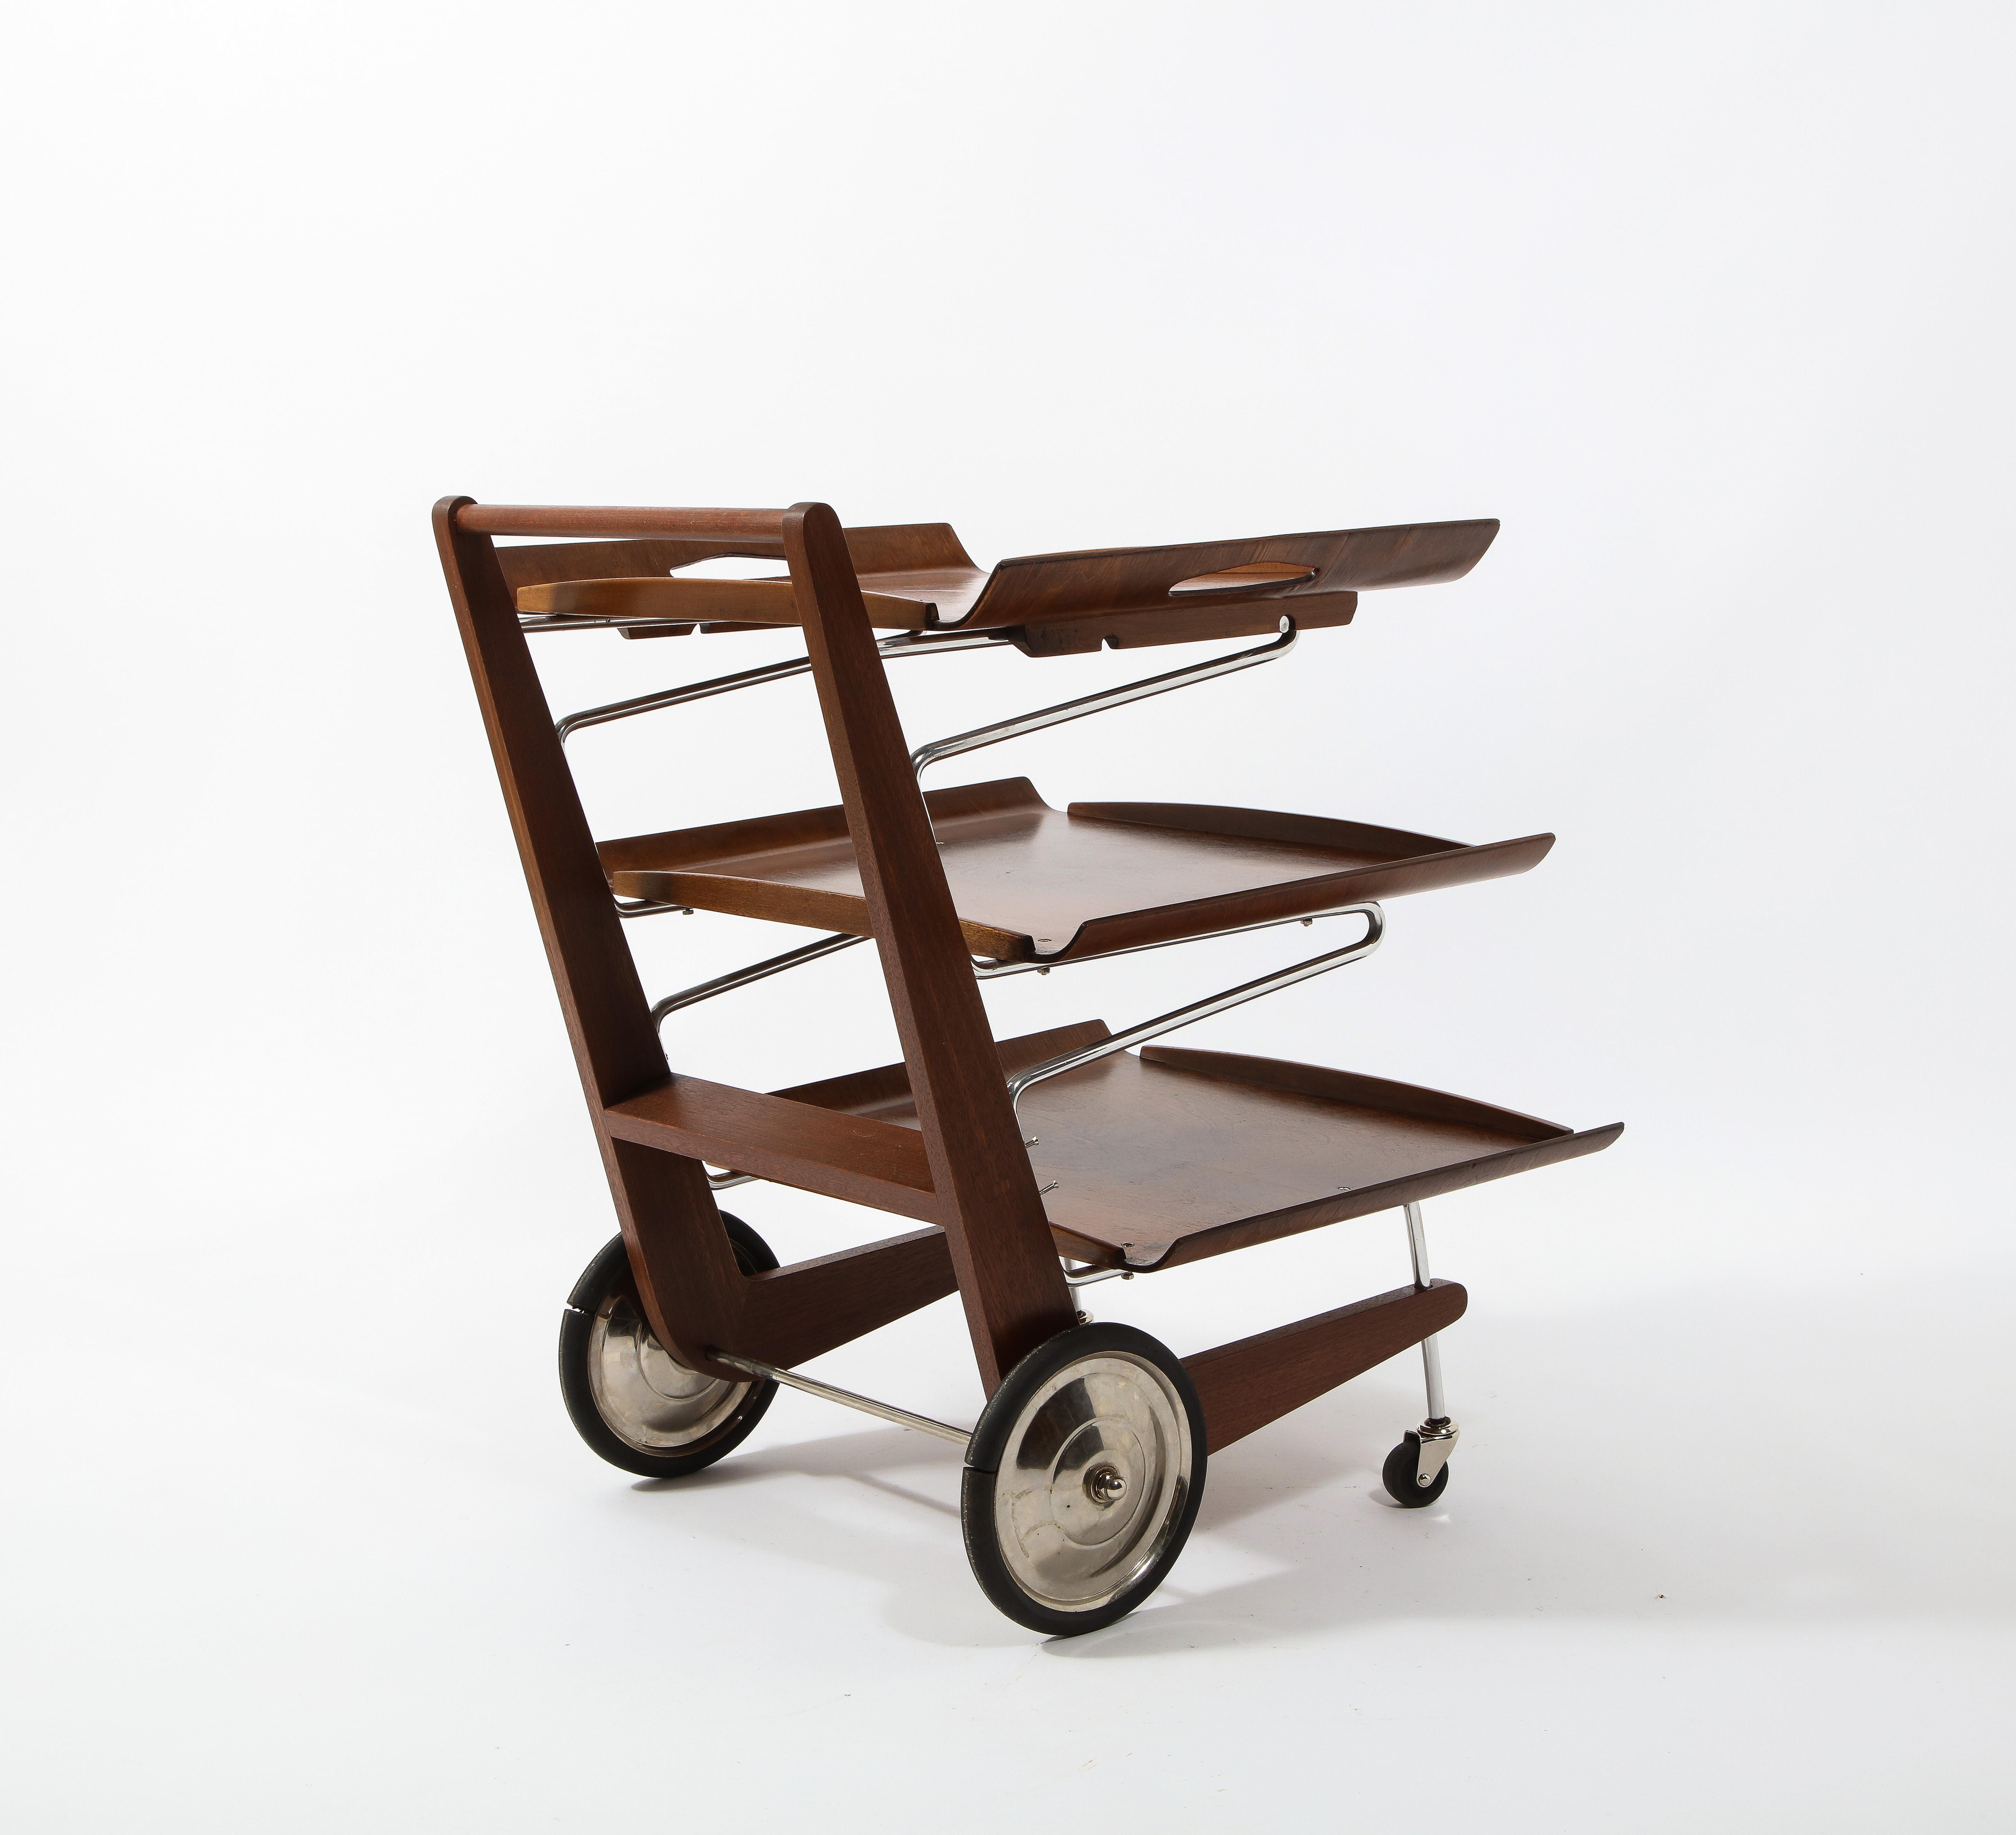 Modernist Tiered Magazine Rack on Wheels or Bar Cart, USA 1950's For Sale 4